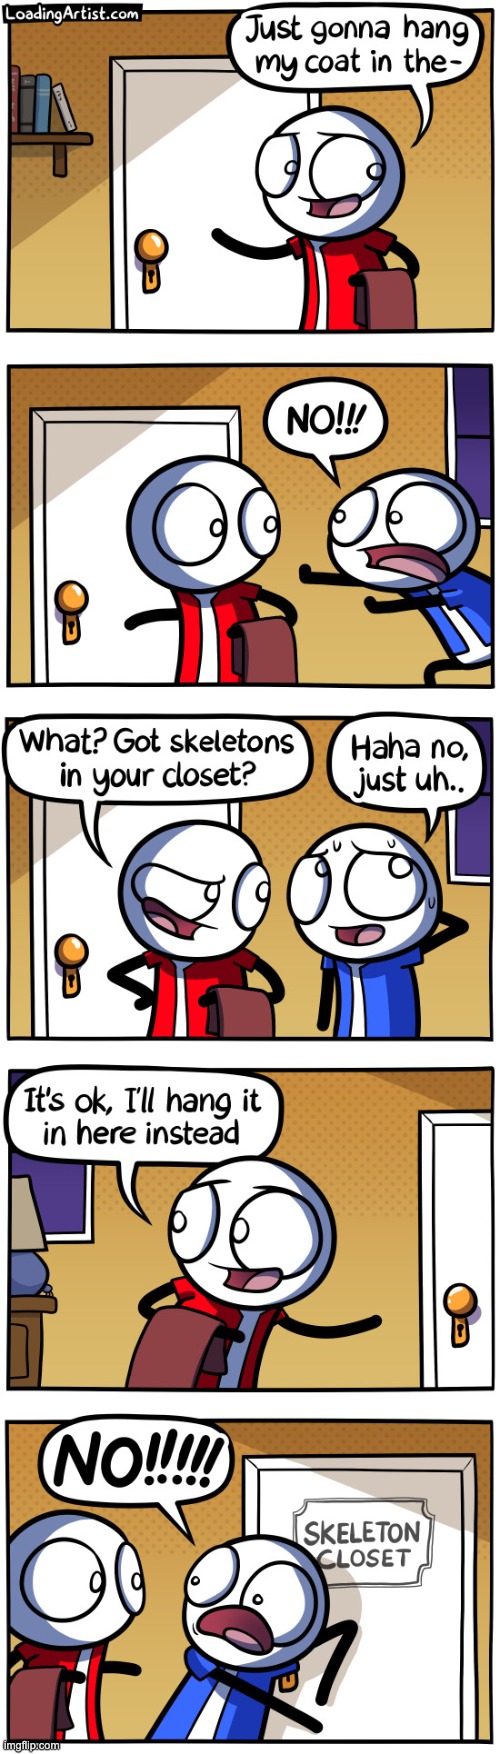 What's in YOUR Closet? | image tagged in skeletons,closet | made w/ Imgflip meme maker